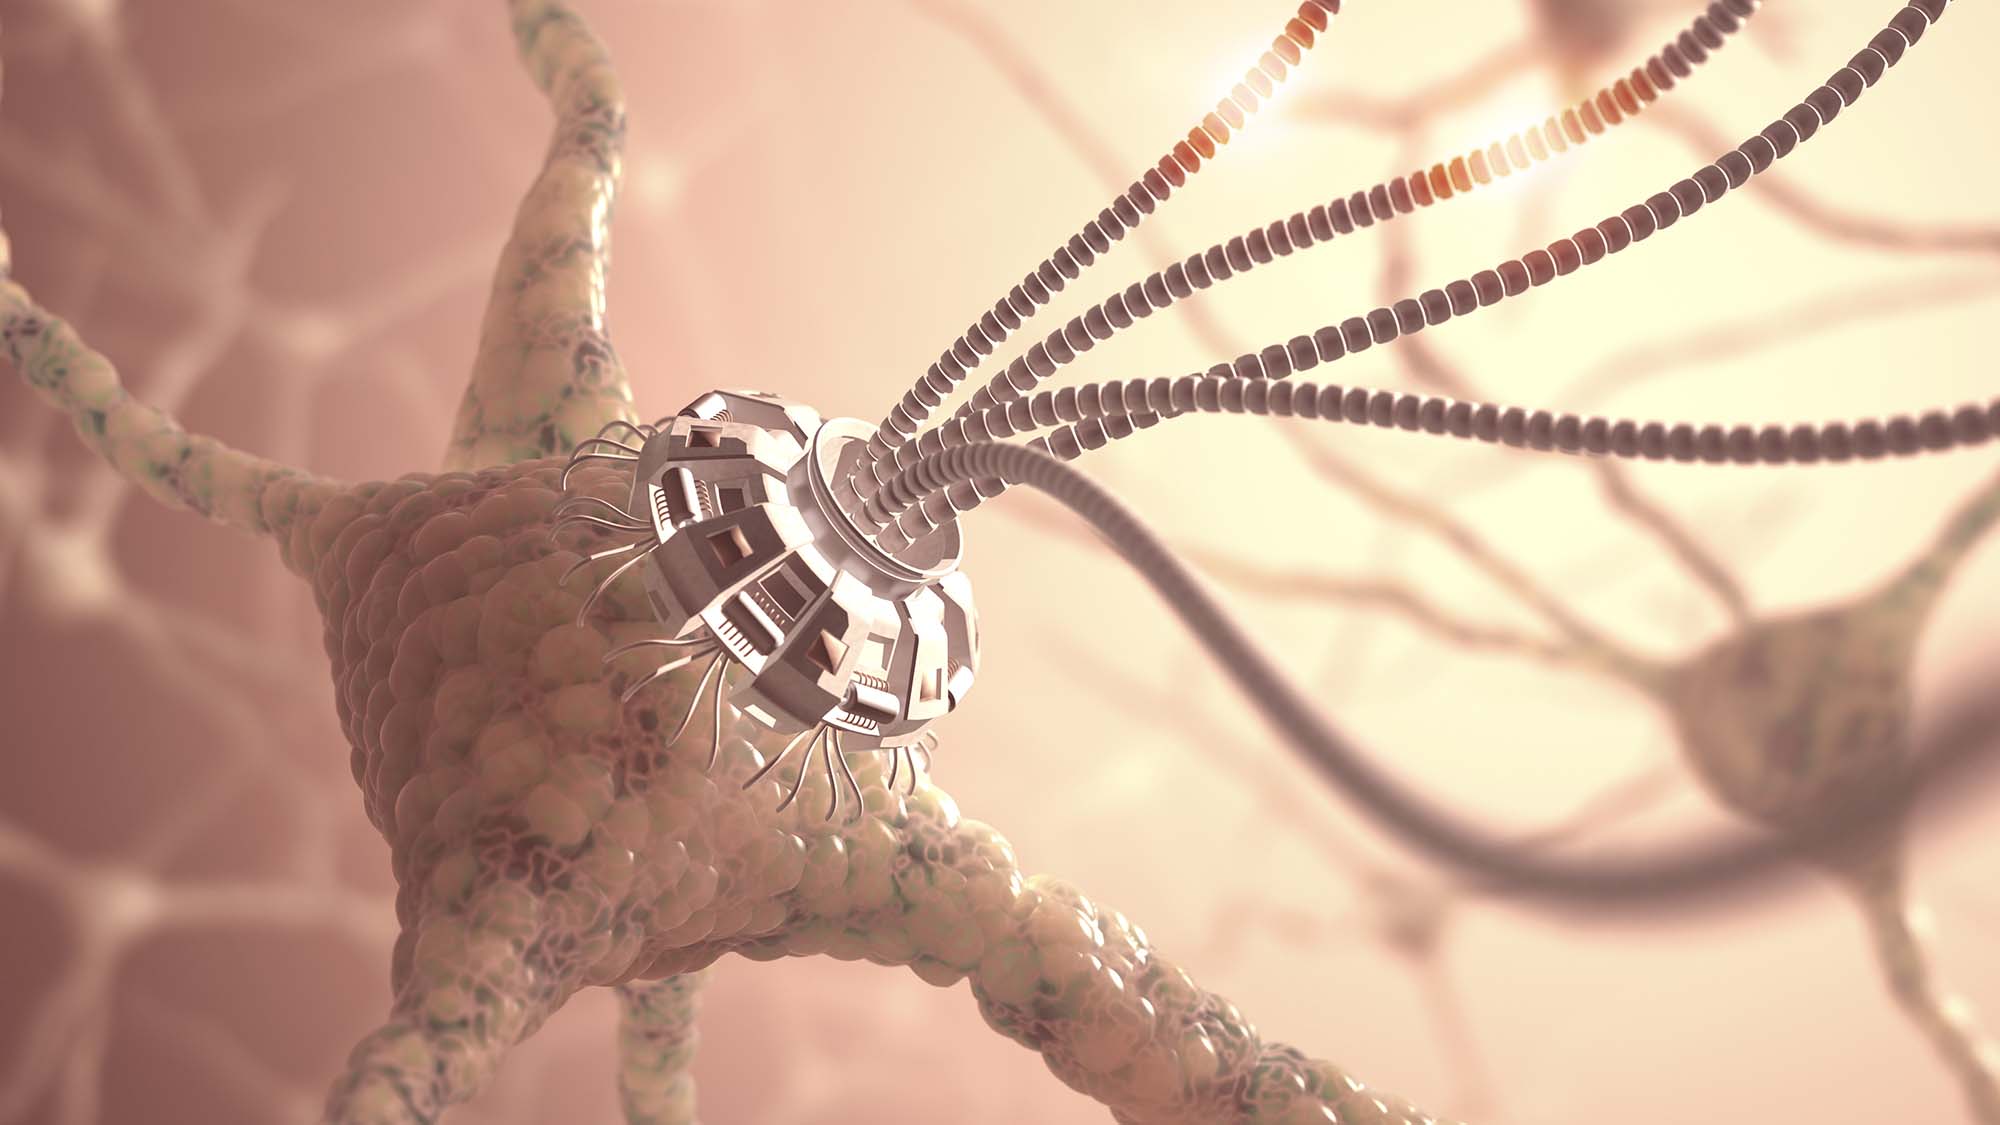 A stylized depiction of a neuron with a metallic, futuristic implant at its core, connecting with other neurons via extended wires.